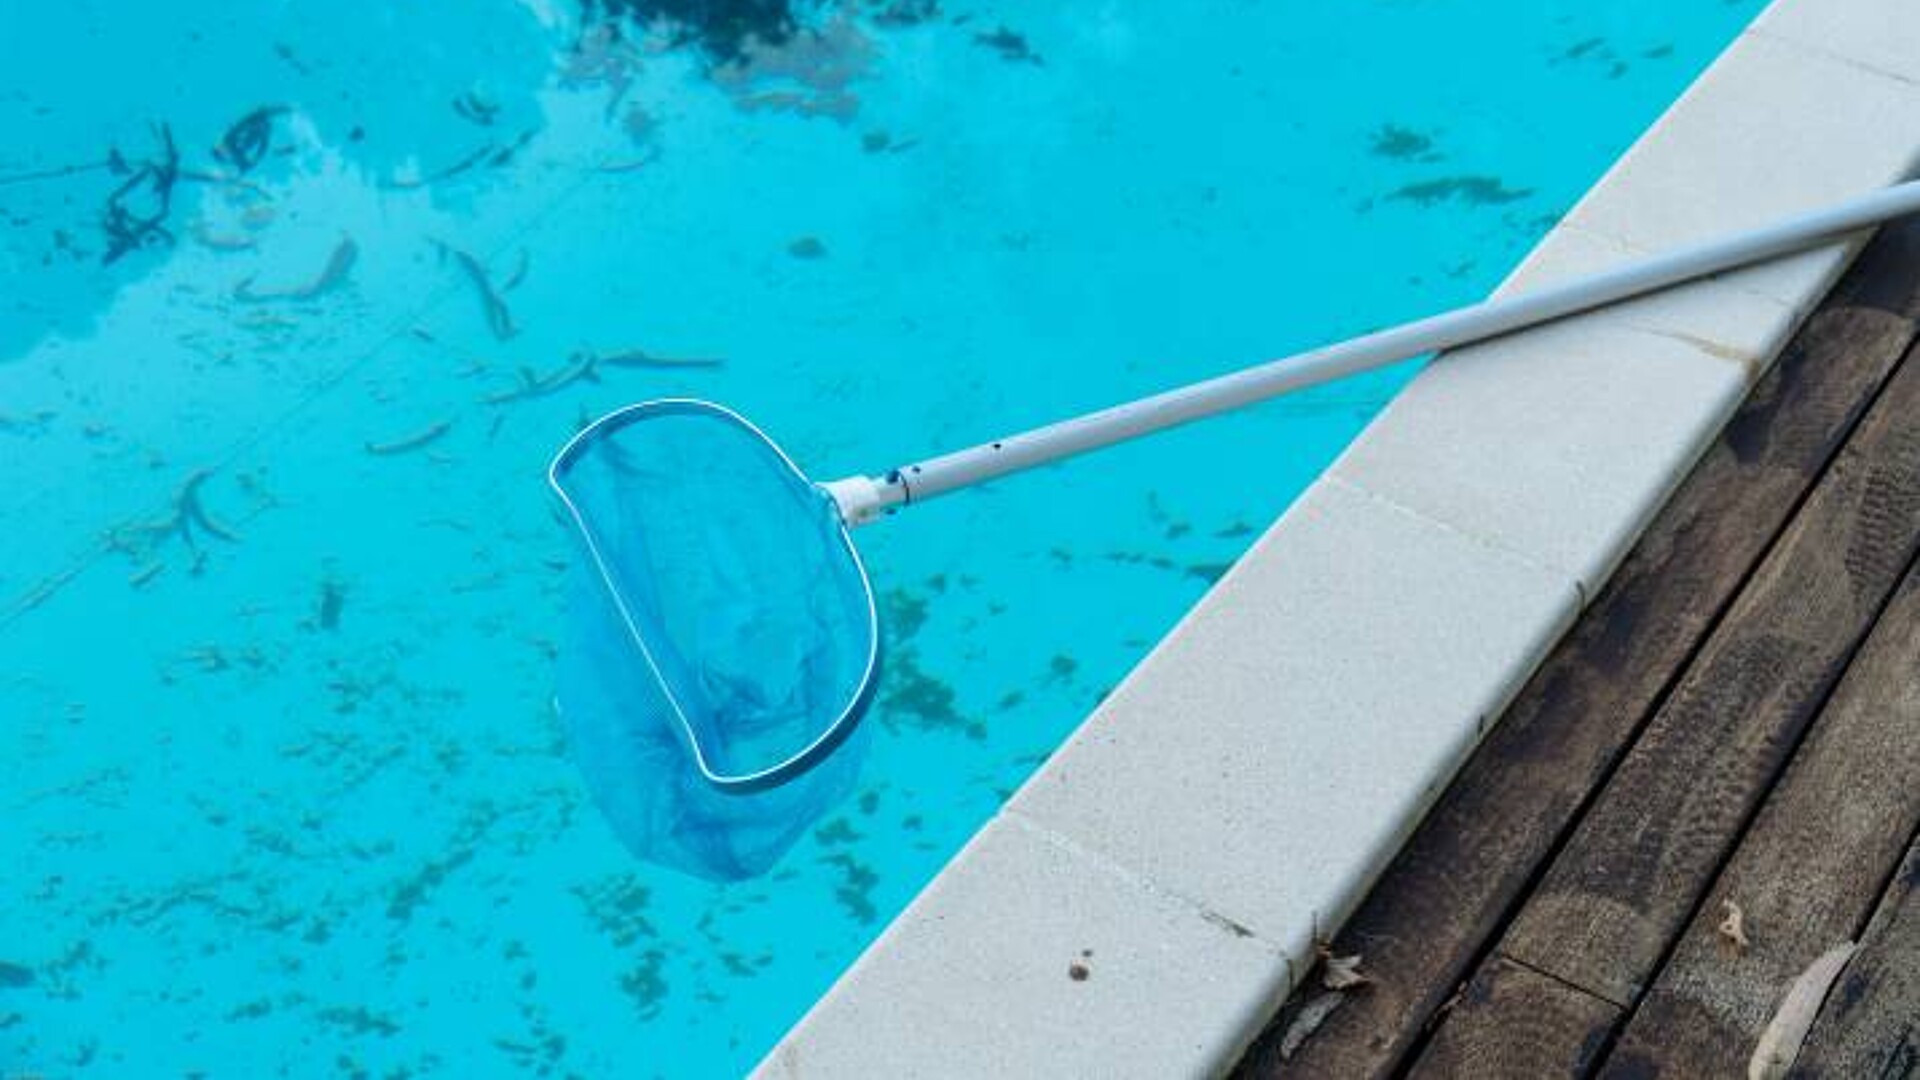 How to Clean a Dirty Pool